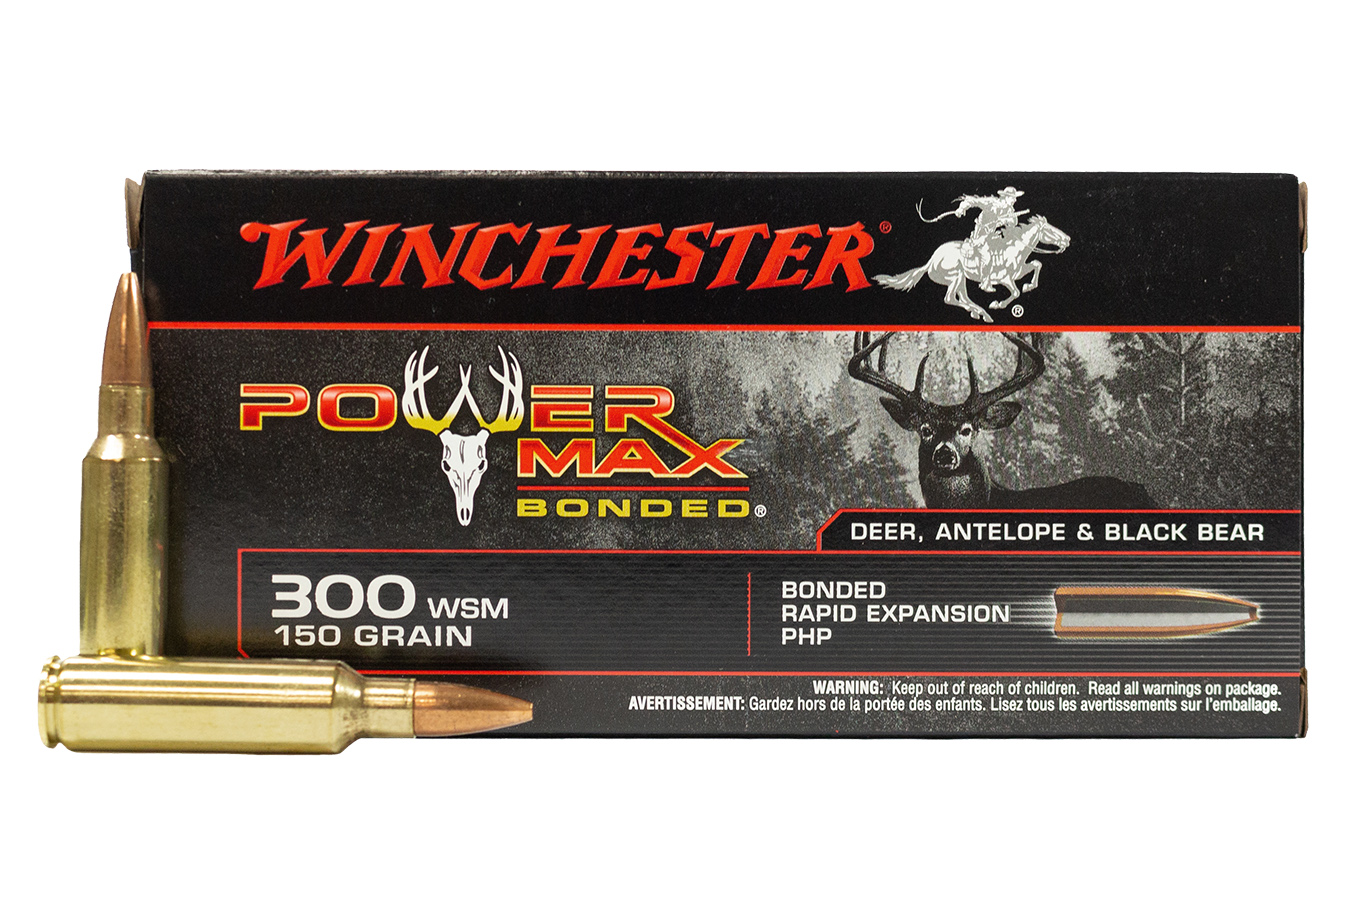 WINCHESTER AMMO 300 WSM 150 GR POWER MAX BONDED